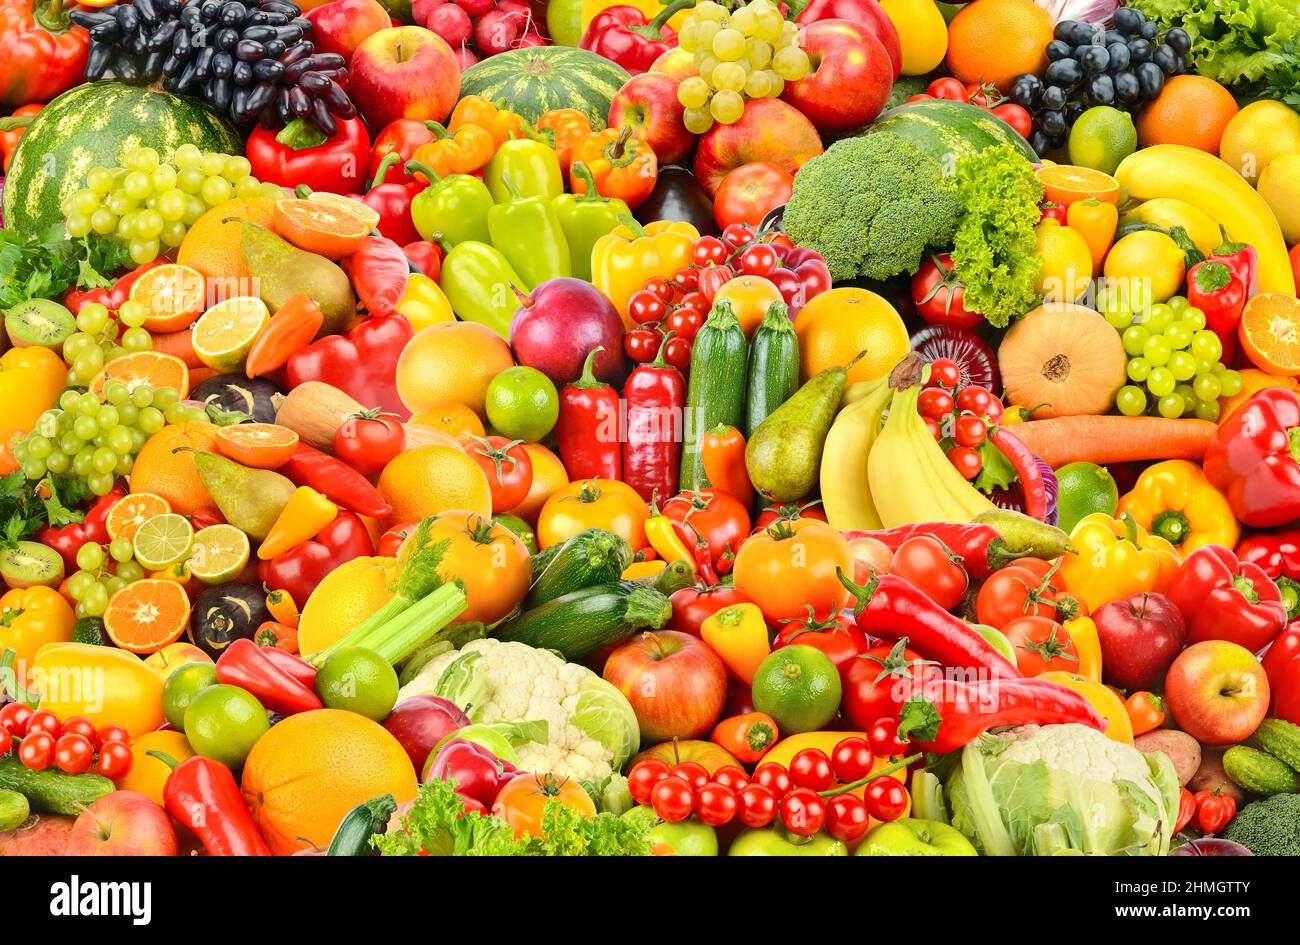 Large fruit pattern of fresh and healthy colorful vegetables and fruits. Stock Photo